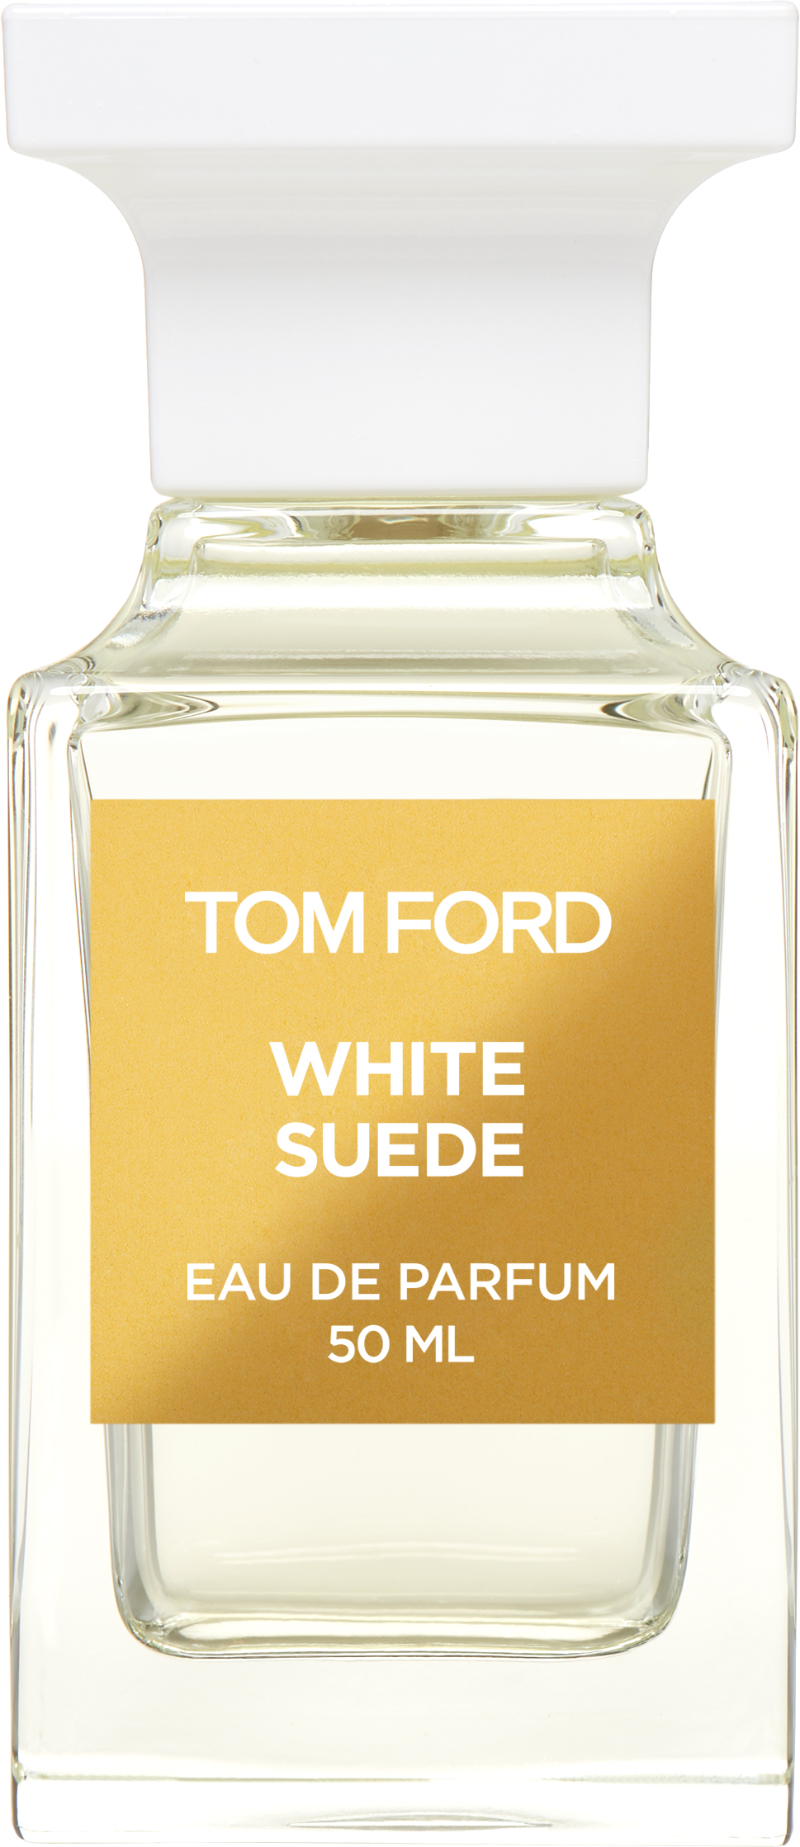 Tom Ford - White Suede EdP 50 ml